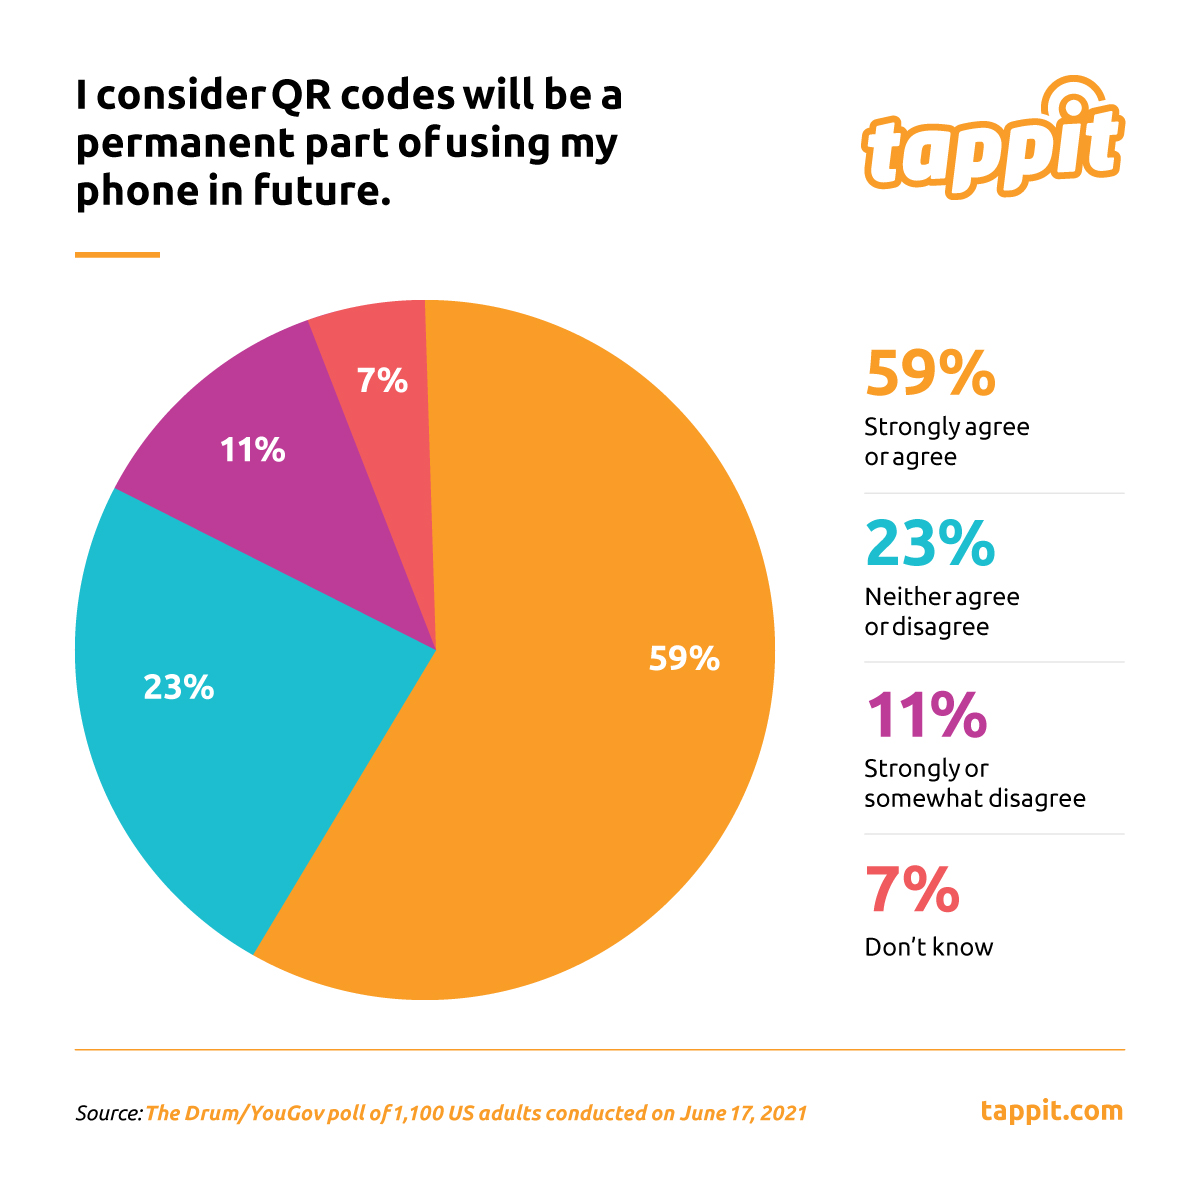 QR code usage in the future